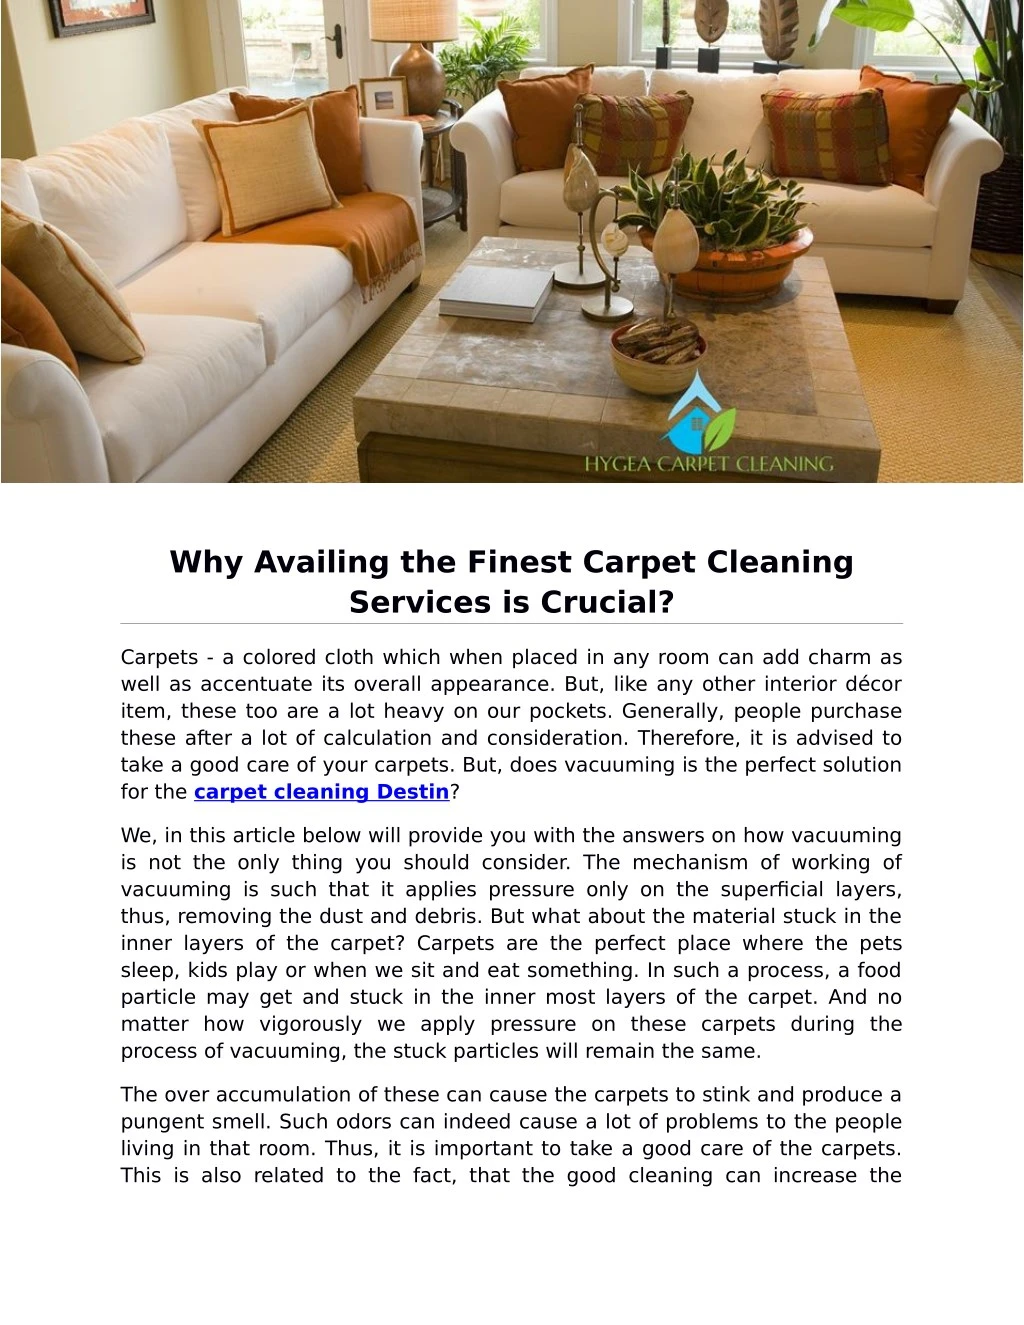 why availing the finest carpet cleaning services